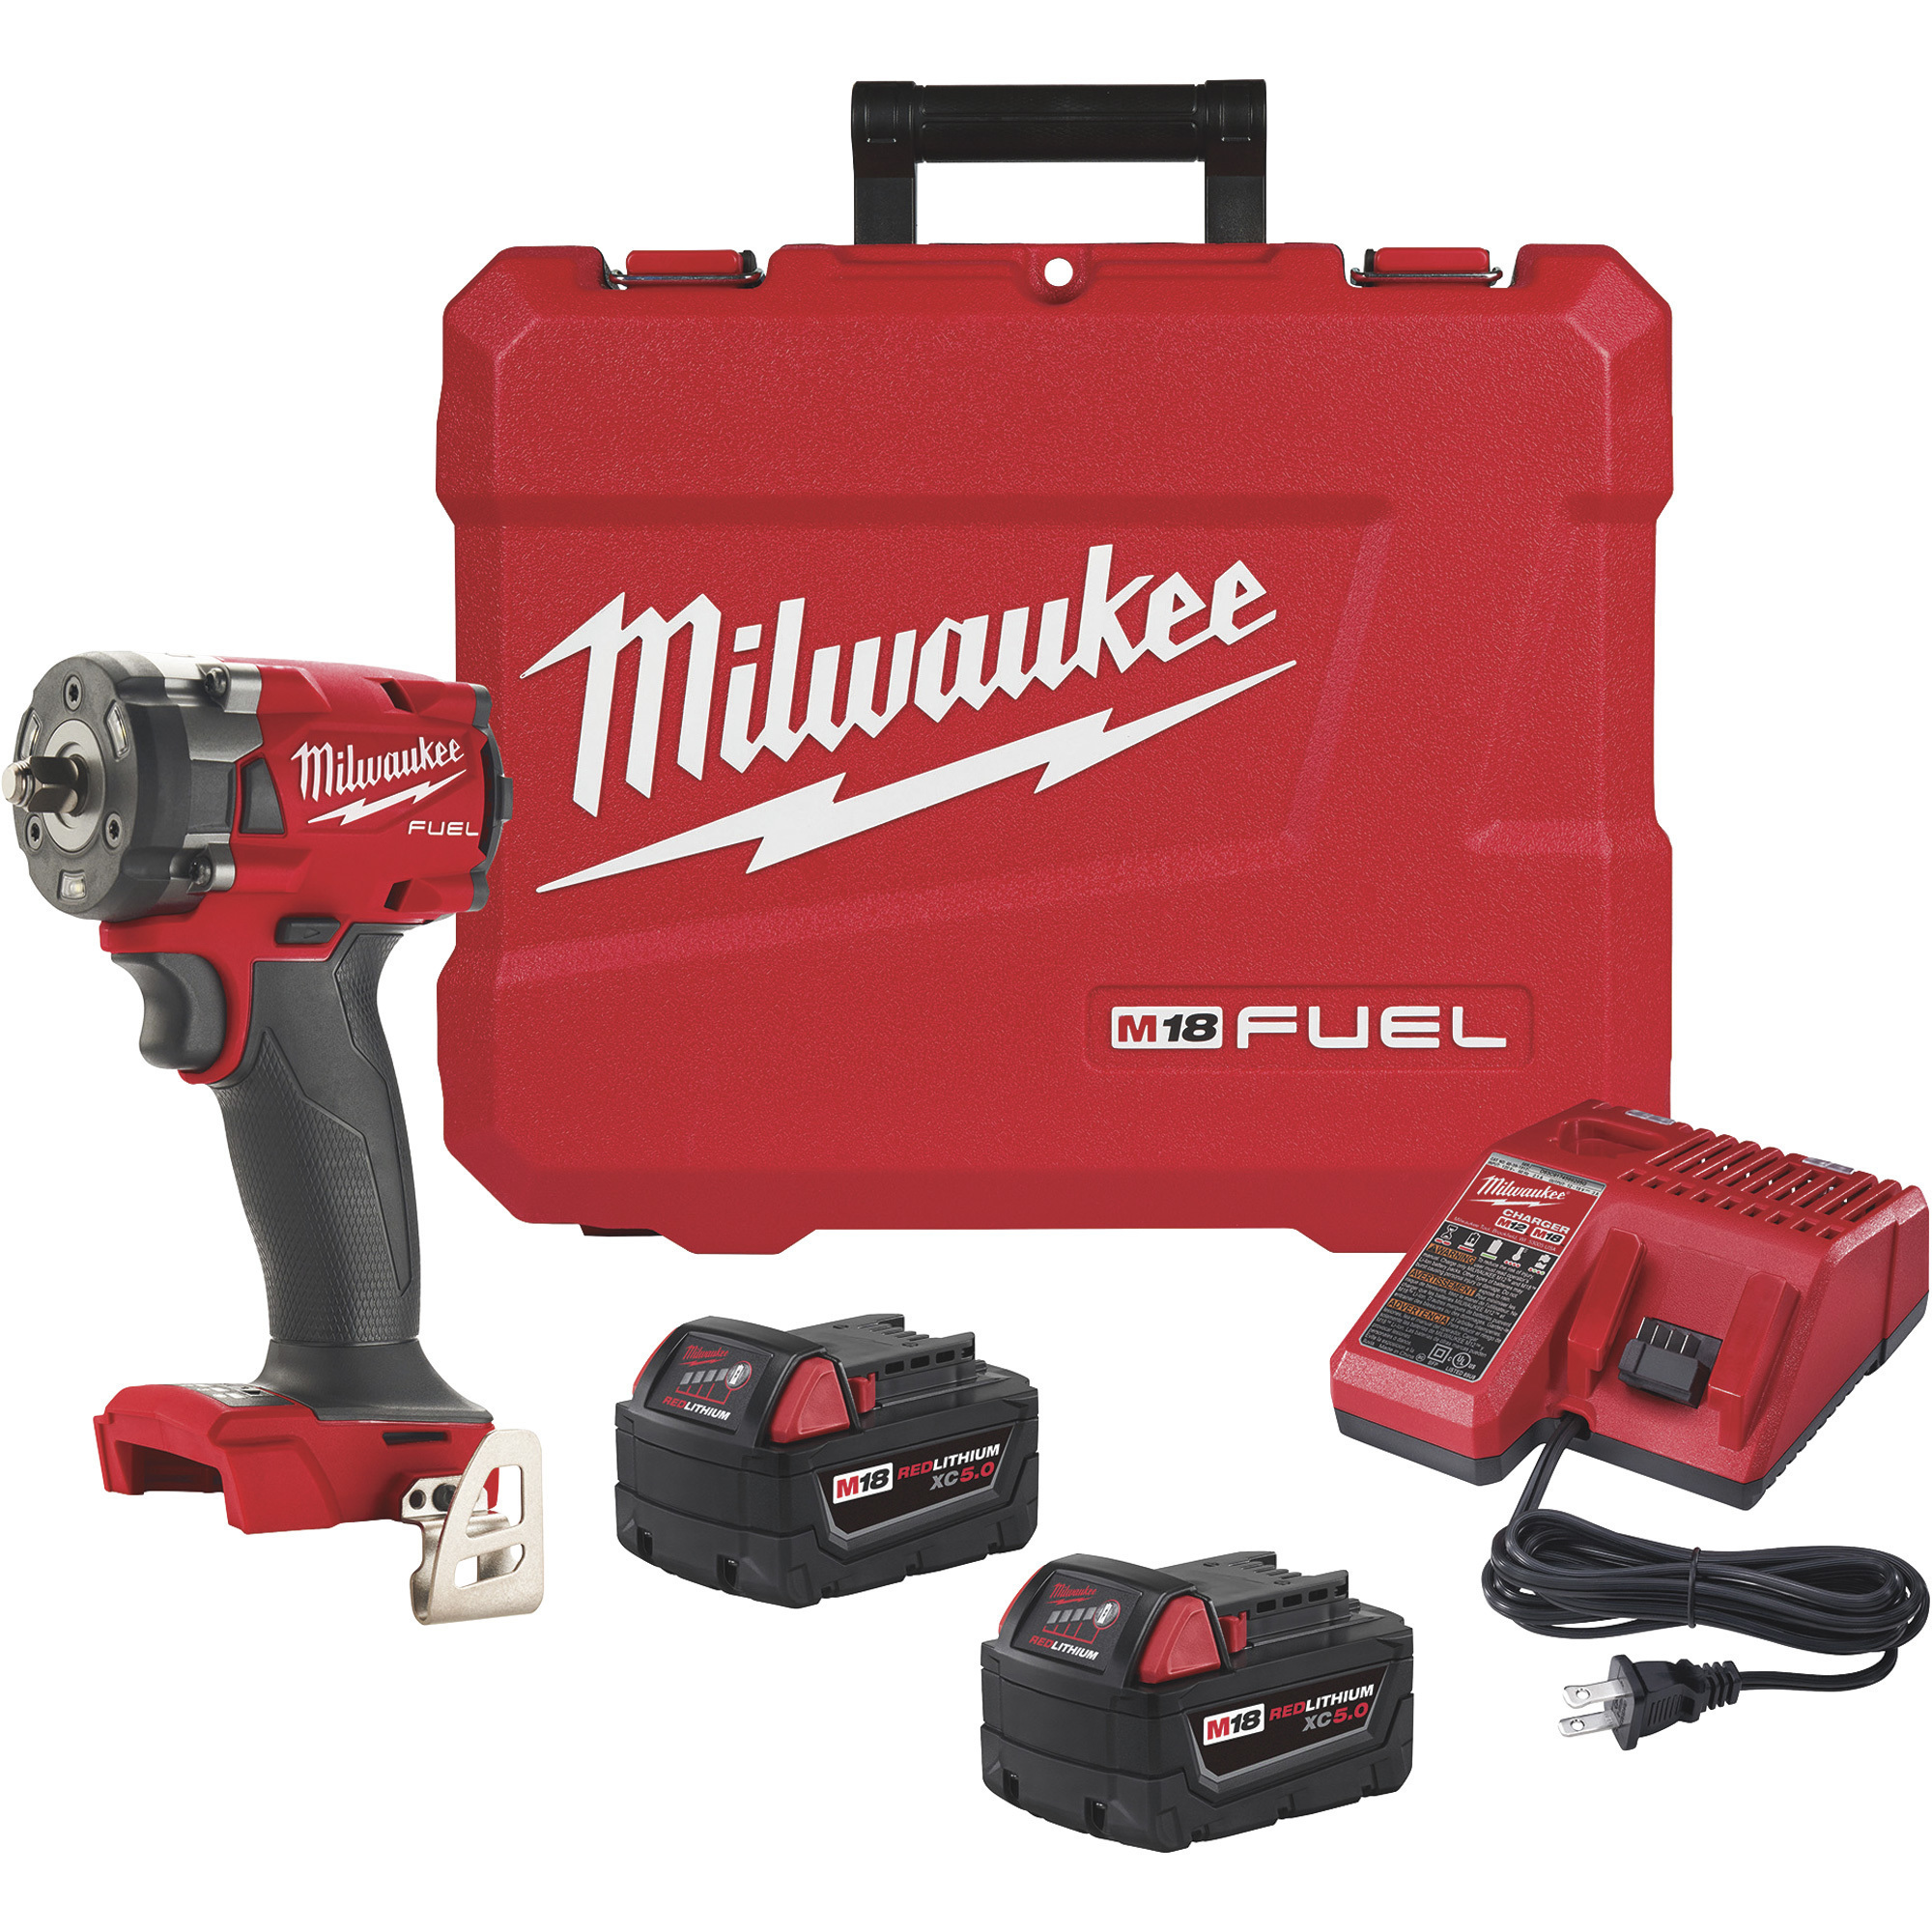 Milwaukee M18 FUEL Compact Impact Wrench with Friction Ring Kit, 3/8Inch Drive, 250 Ft./Lbs. Torque, Model 2854-22R